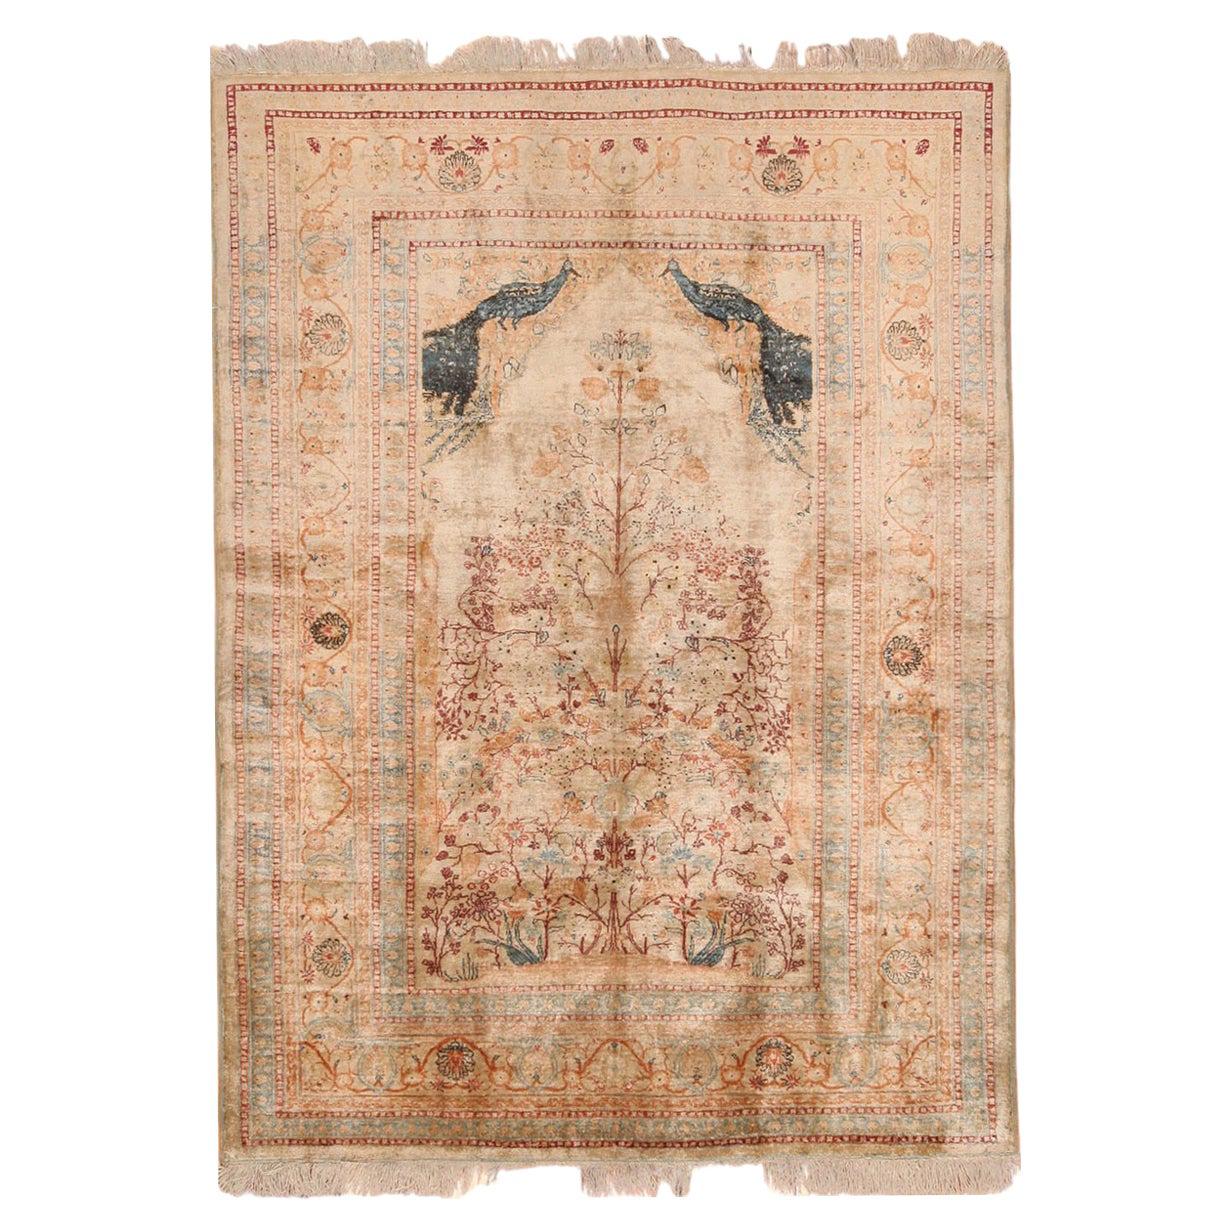 Antique Persian Tabriz Silk Prayer Rug.4 ft 3 in x 5 ft 6 in For Sale